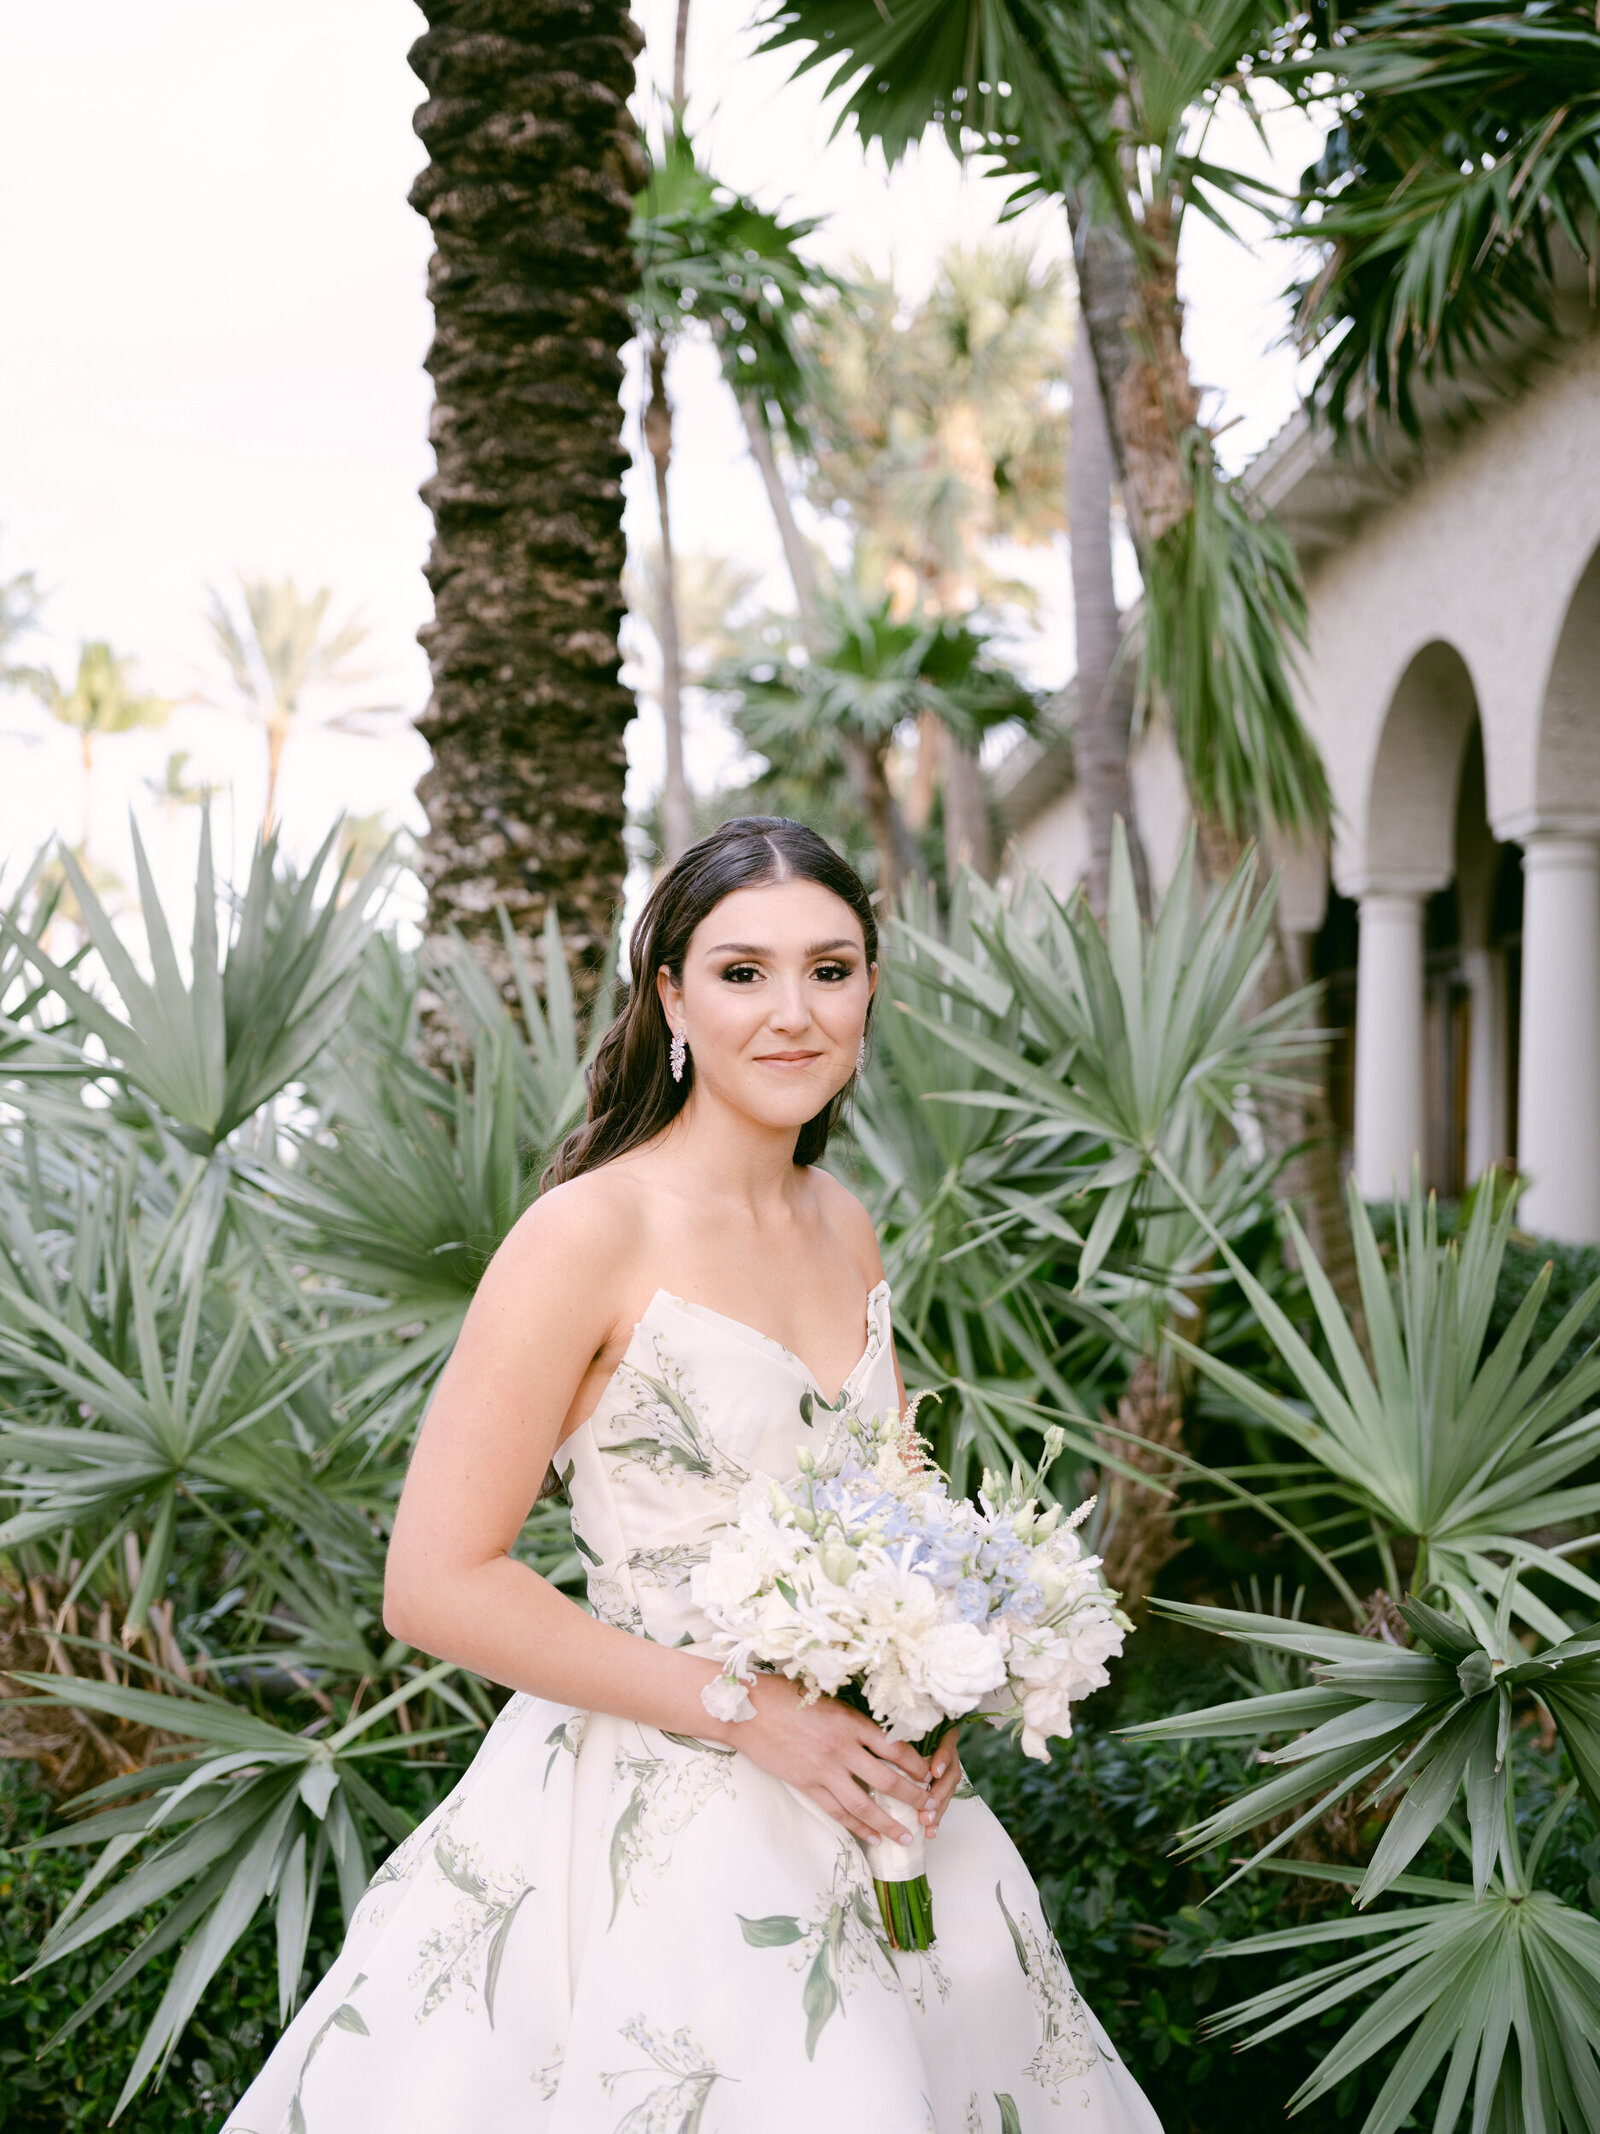 the-breakers-palm-beach-monique-lhuillier-bride-guerdy-design-renny-and-reed-the-new-york-times-BAZAAR-brides-Little-Black-Book-harpers-BAZAAR-A-Top-Wedding-Photographer-in-the-World-judith-rae-0314